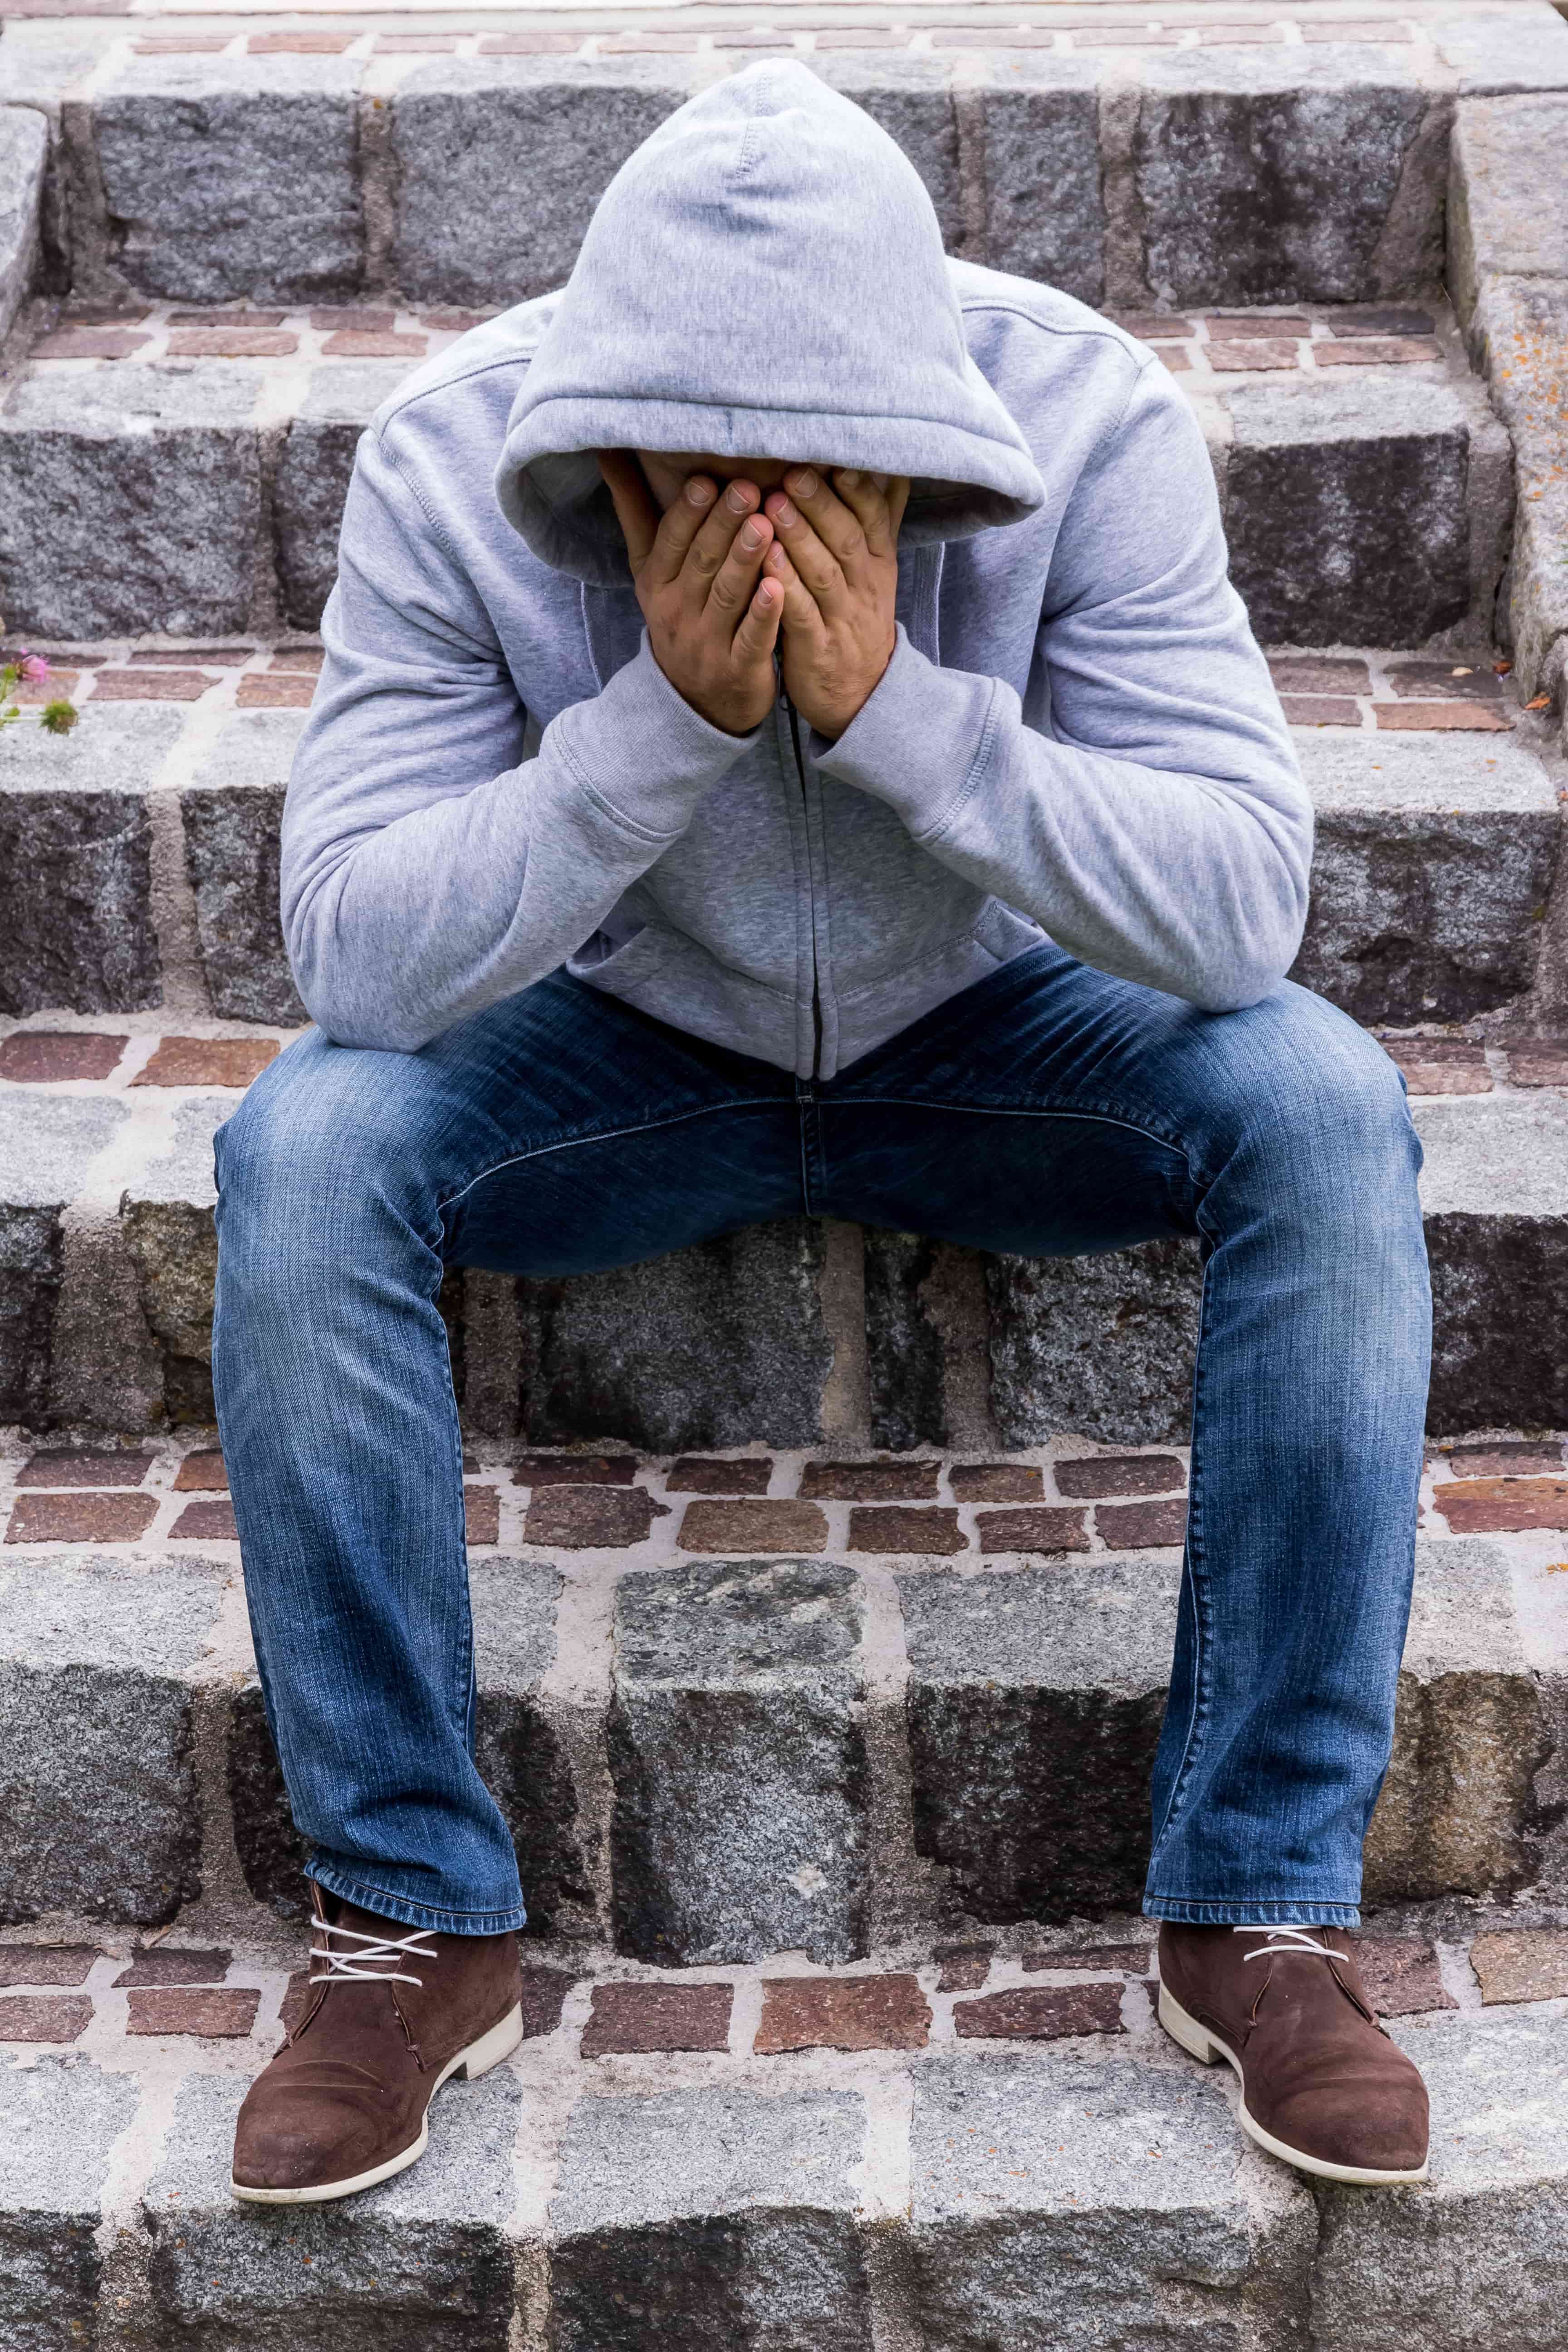 Man sitting on steps and covering his face with hands.